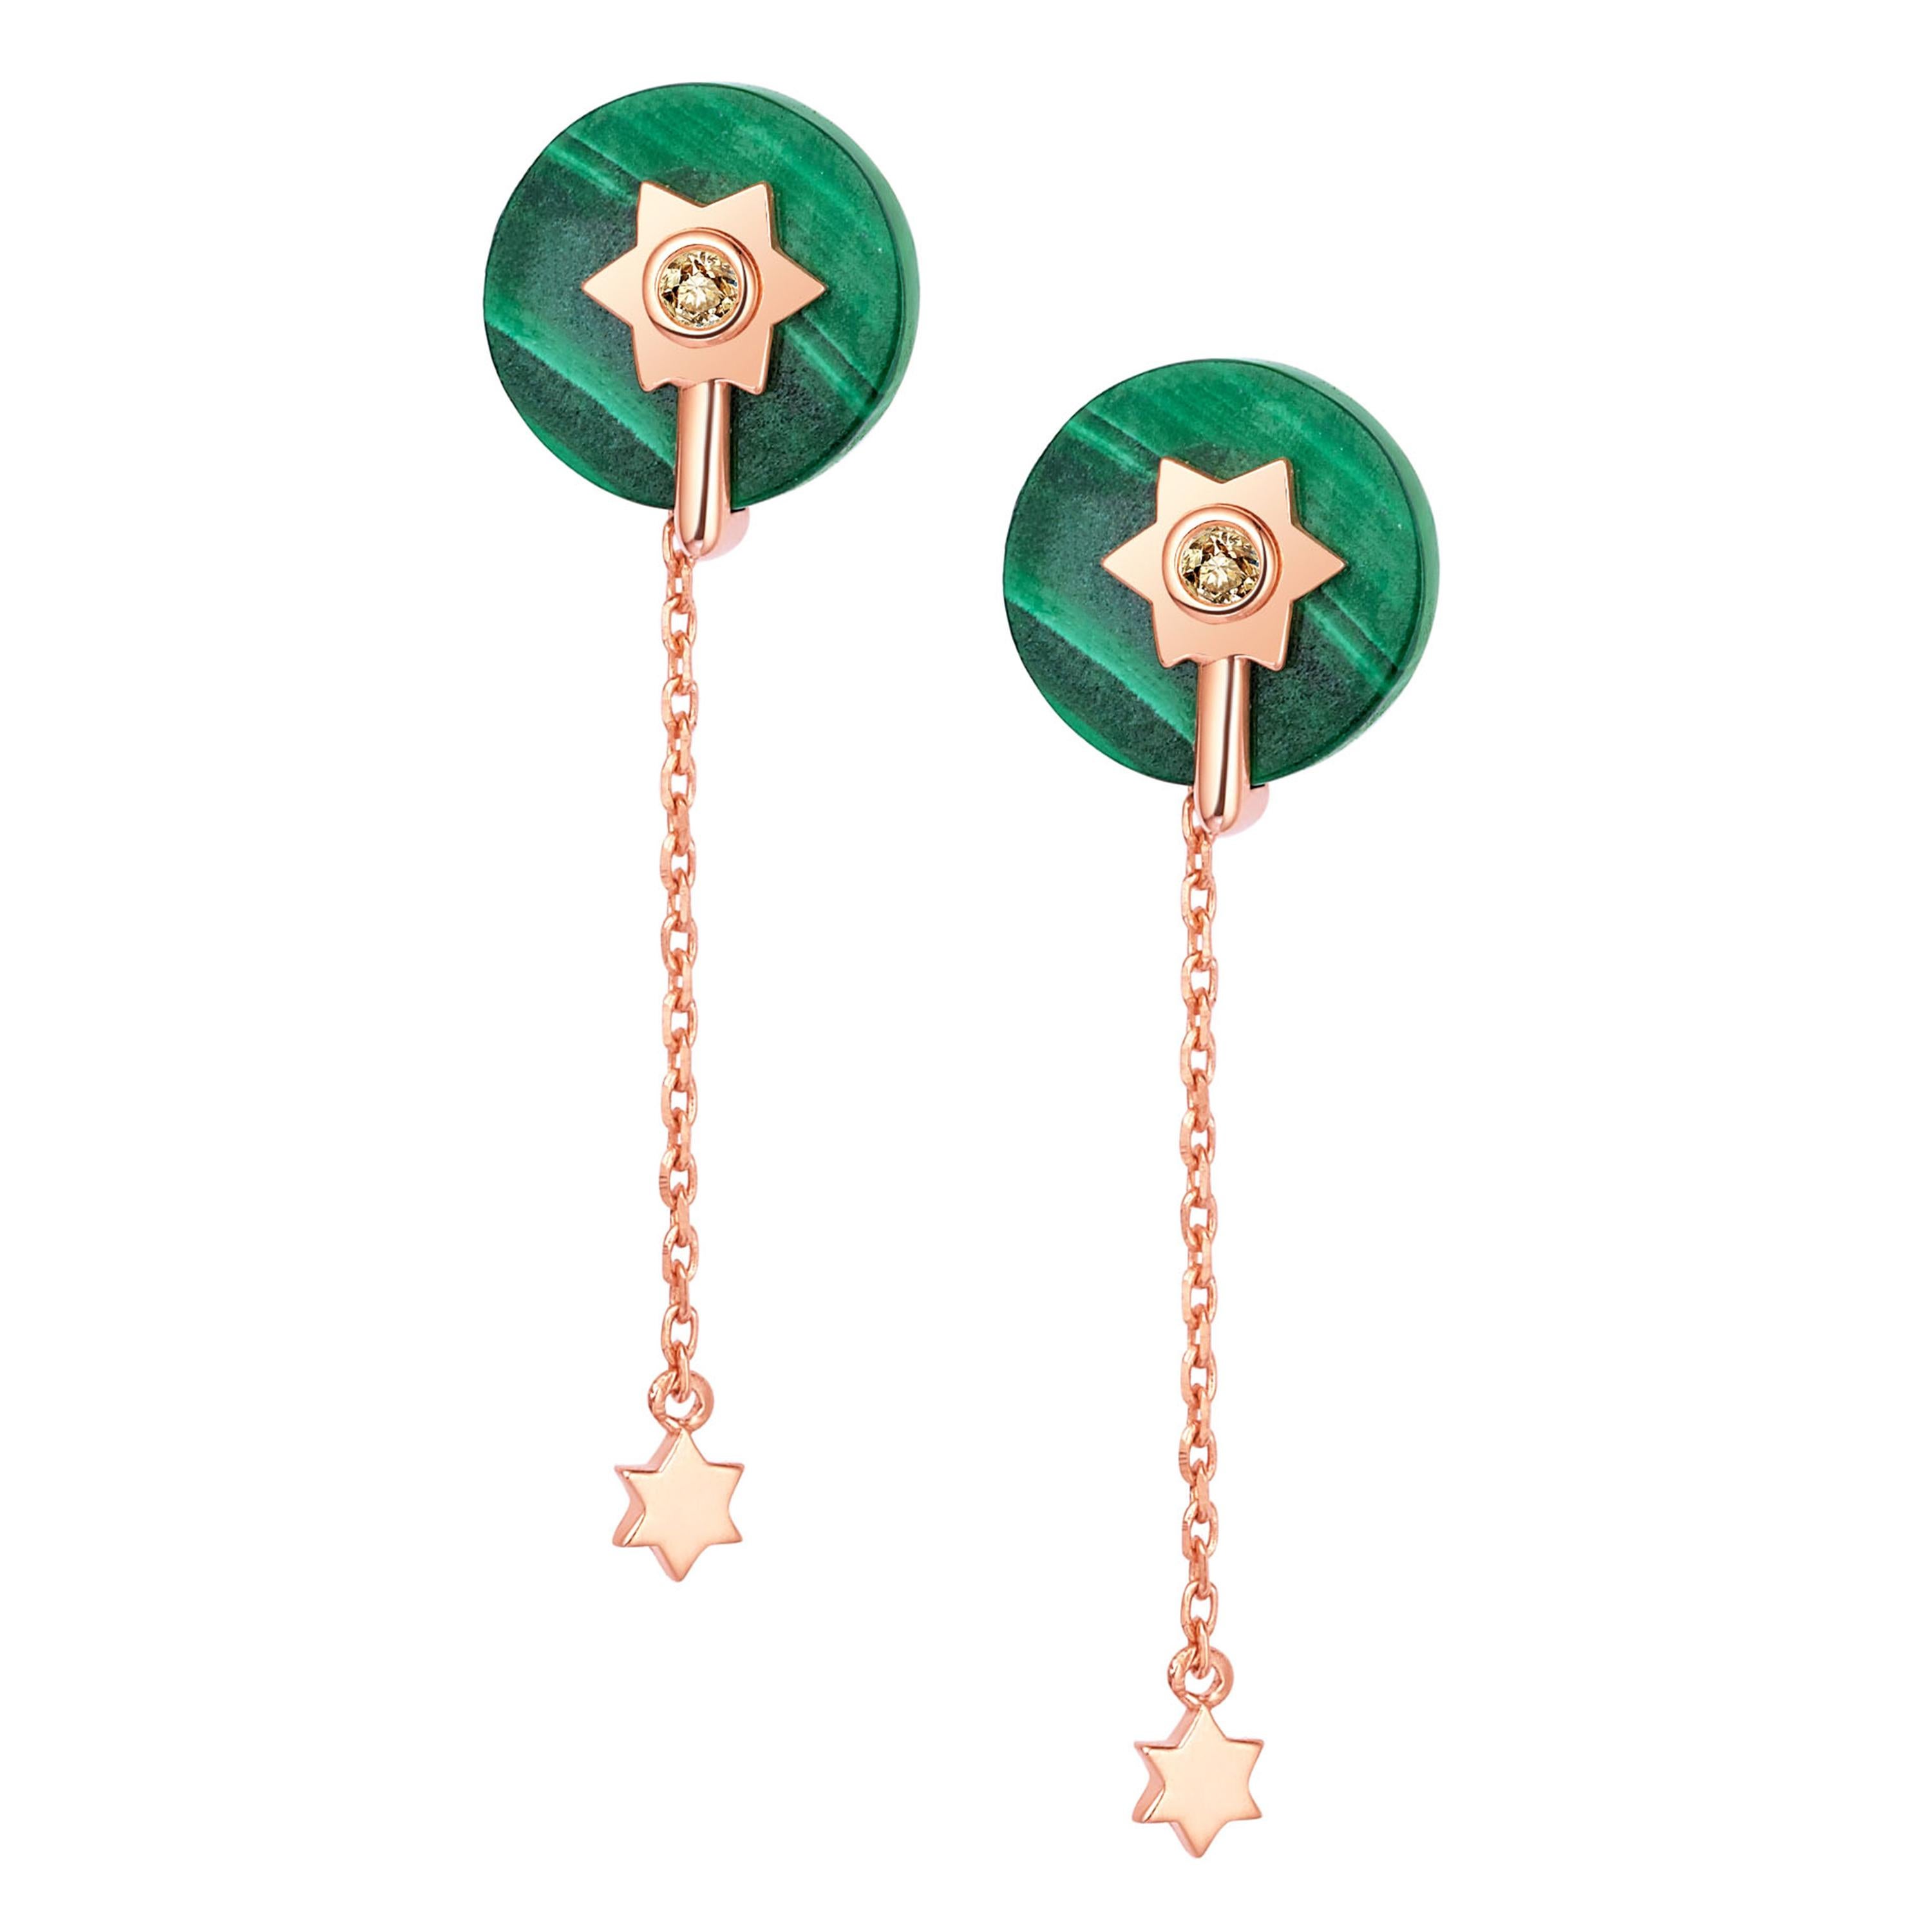 Description:
Stella necklace with spinning 12mm malachite and 0.021ct champagne diamond set in 14ct rose gold. Chain* length is 15 inches + 2 inch extension. Size (LxW) = 16mm x 12mm. Weight = 2g

Stella two-way wear earrings with spinning 10mm